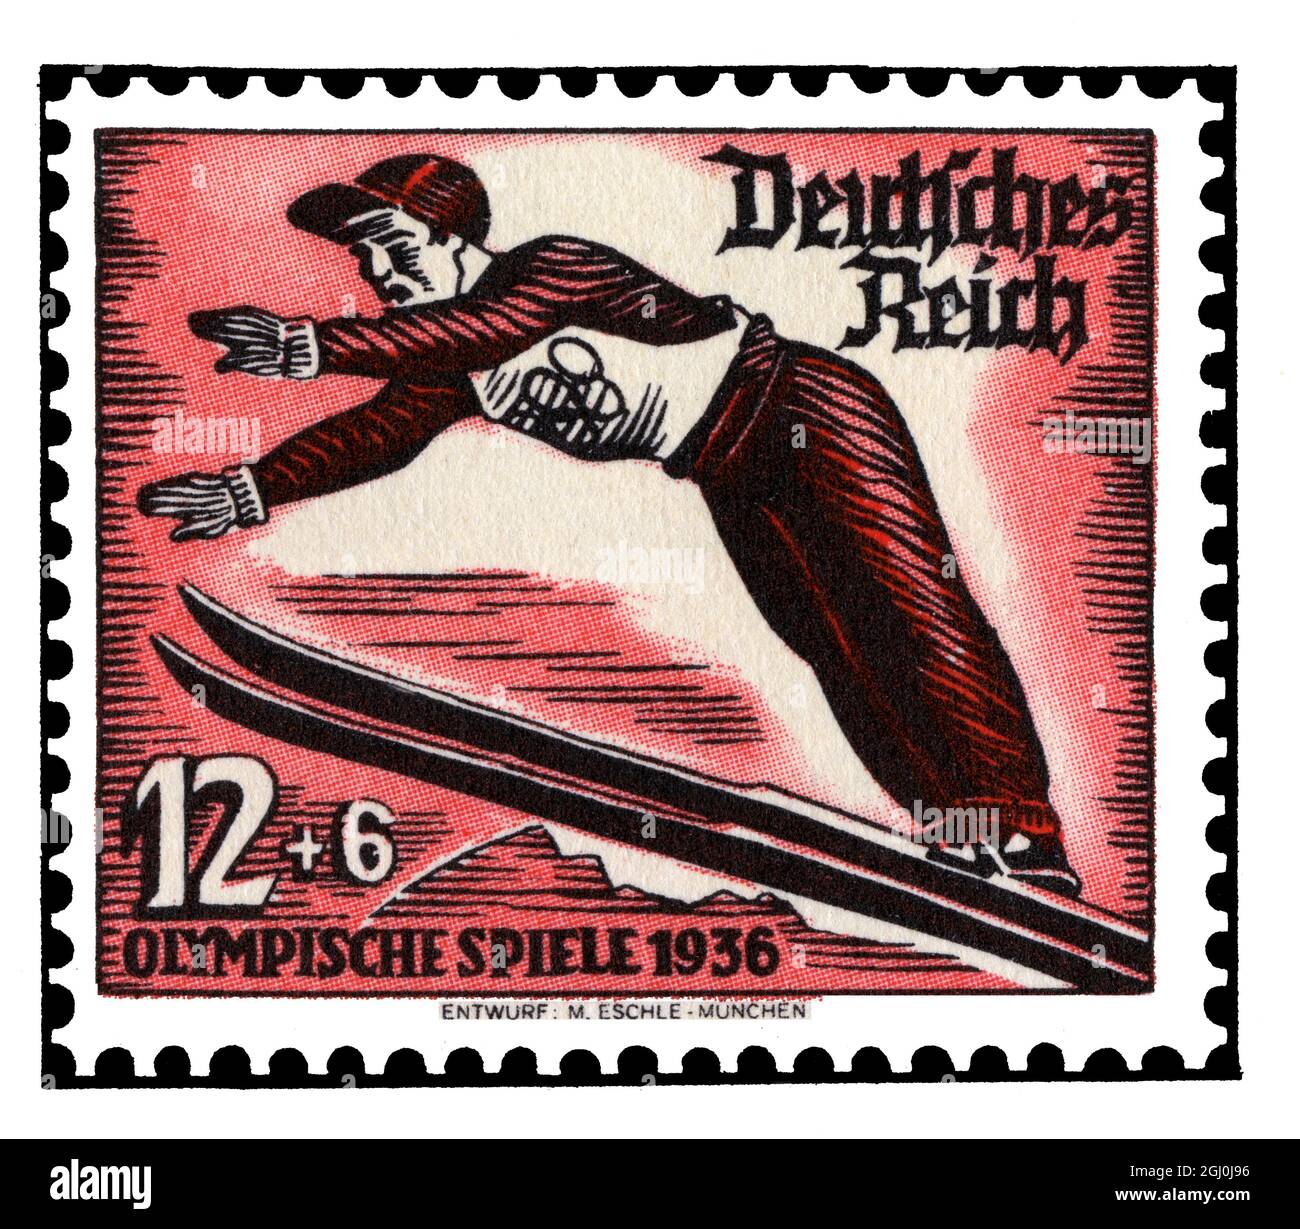 1936 Olympic Games stamp - Germany - Entwerf M. Eschle-Munchen ©TopFoto Stock Photo